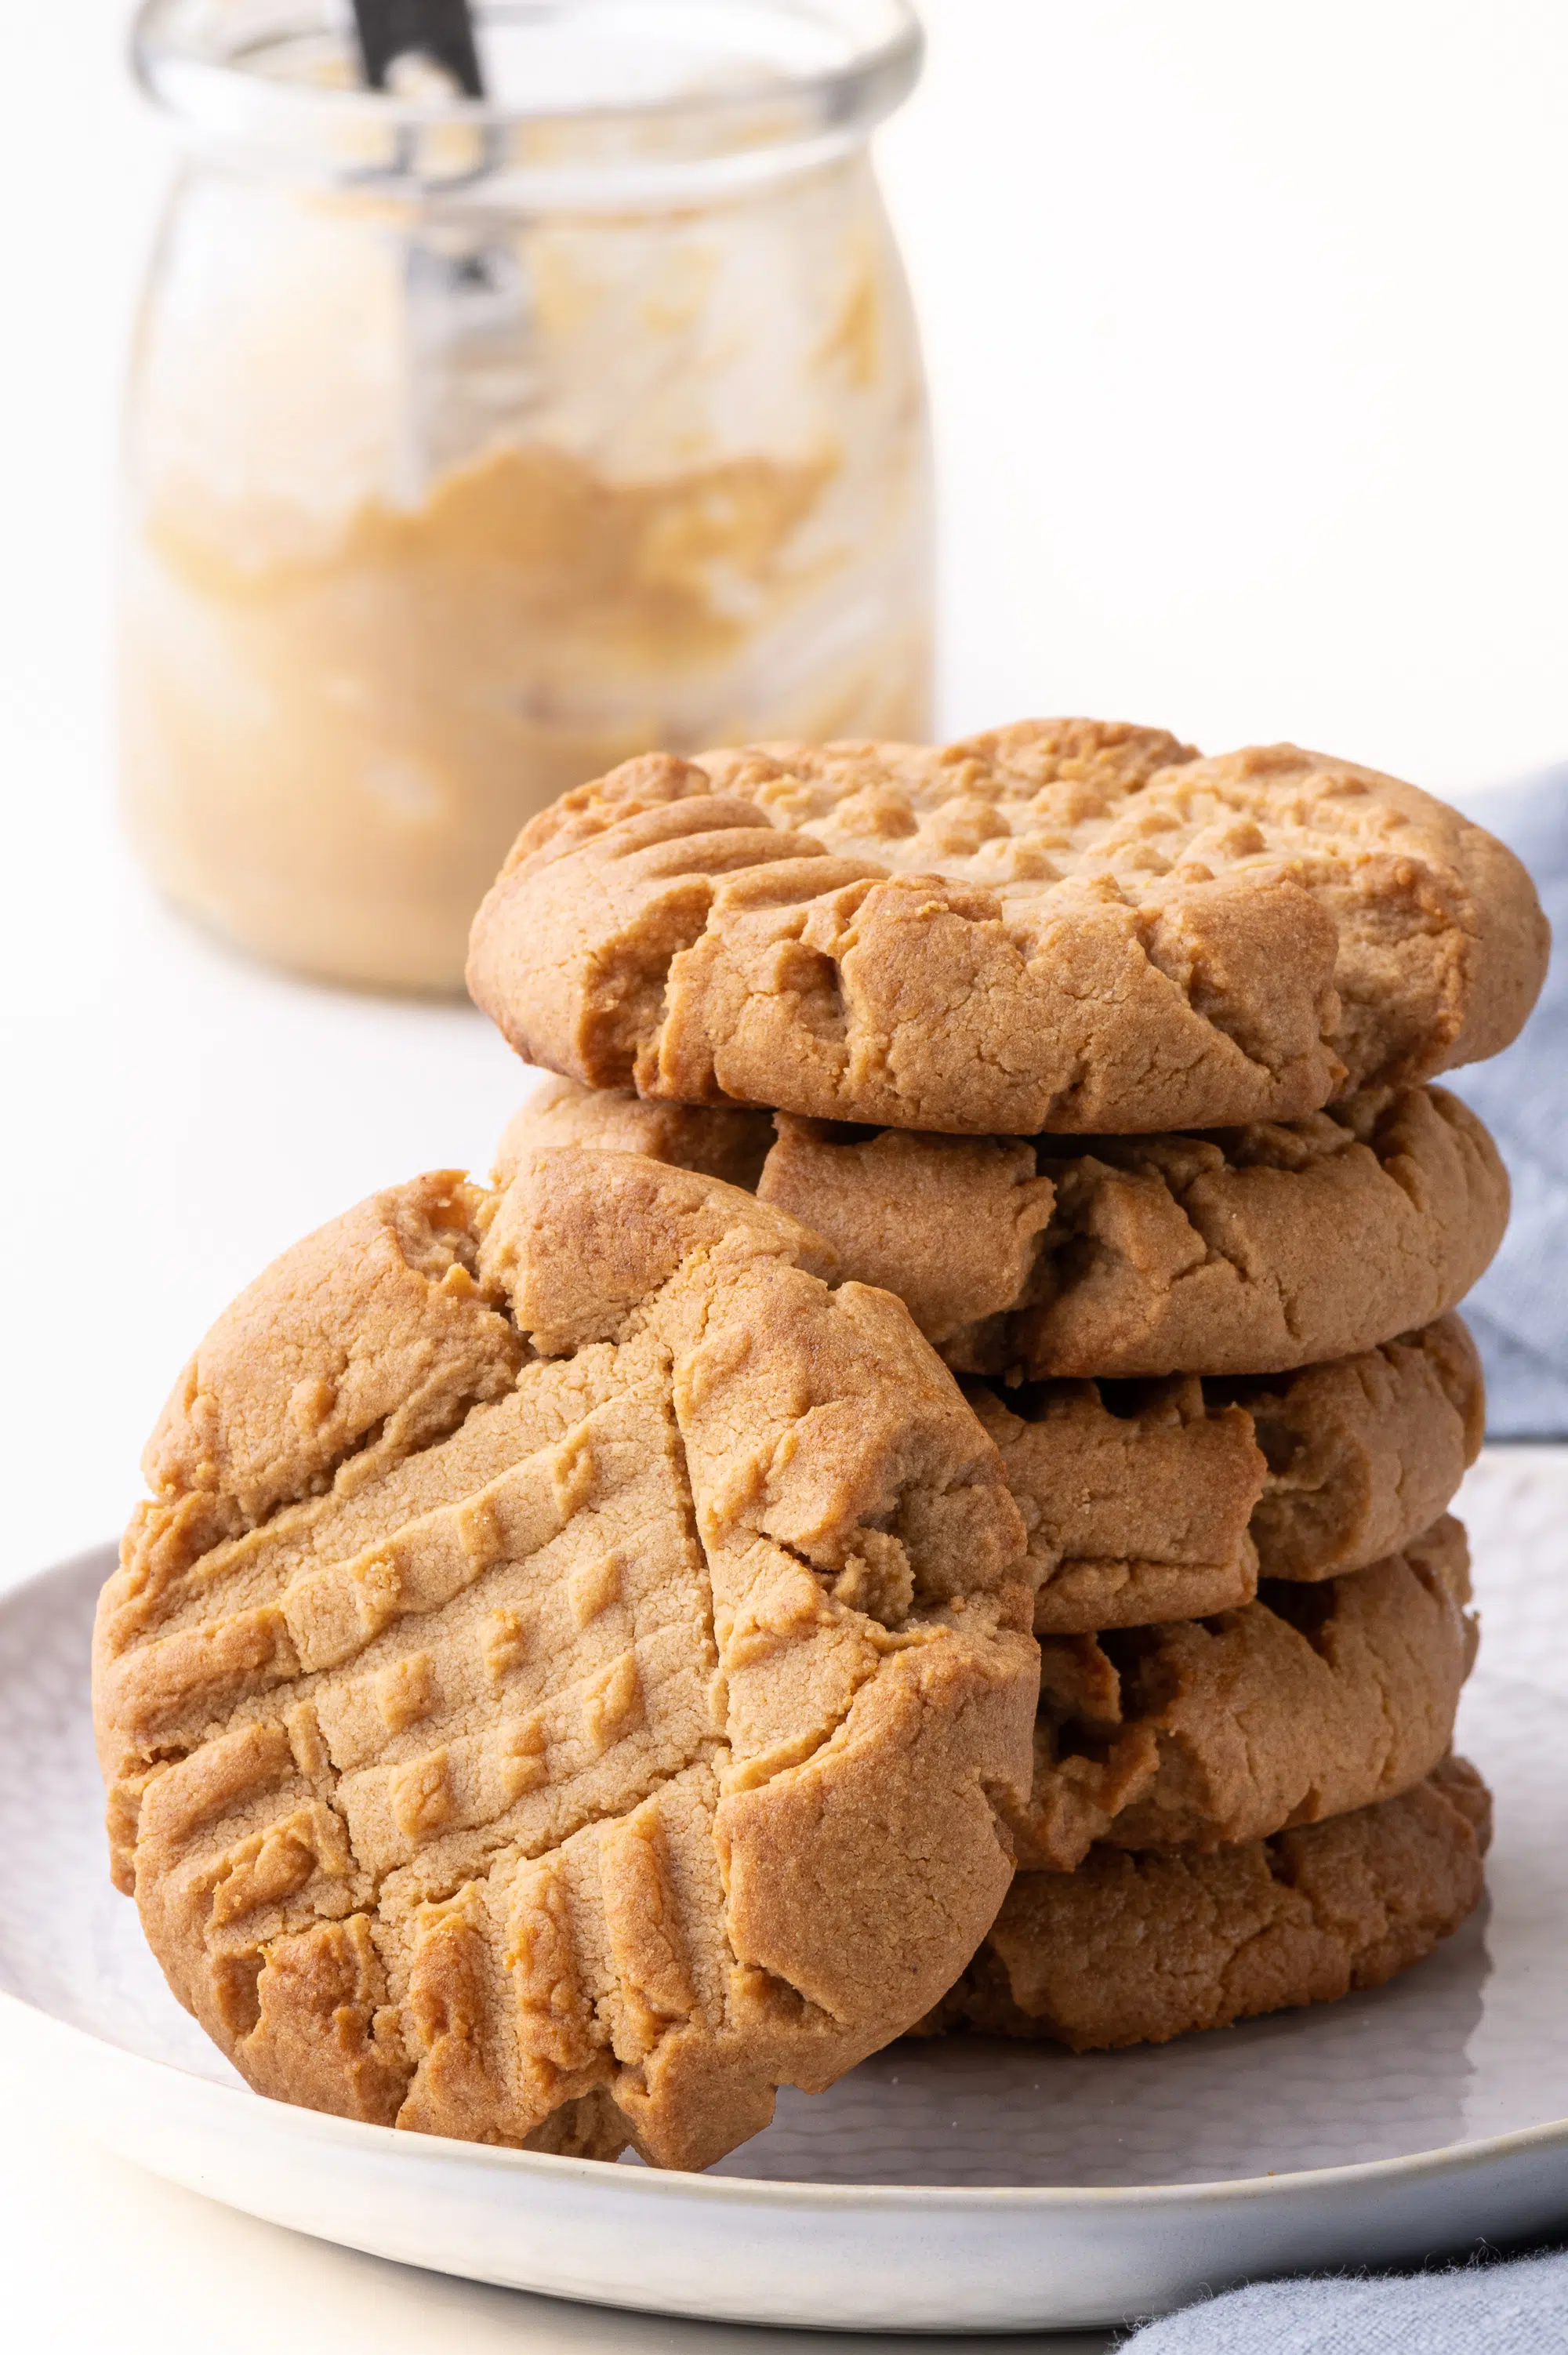 A slack of sugar-free peanut butter cookies will cross hatch marks cross the top. 